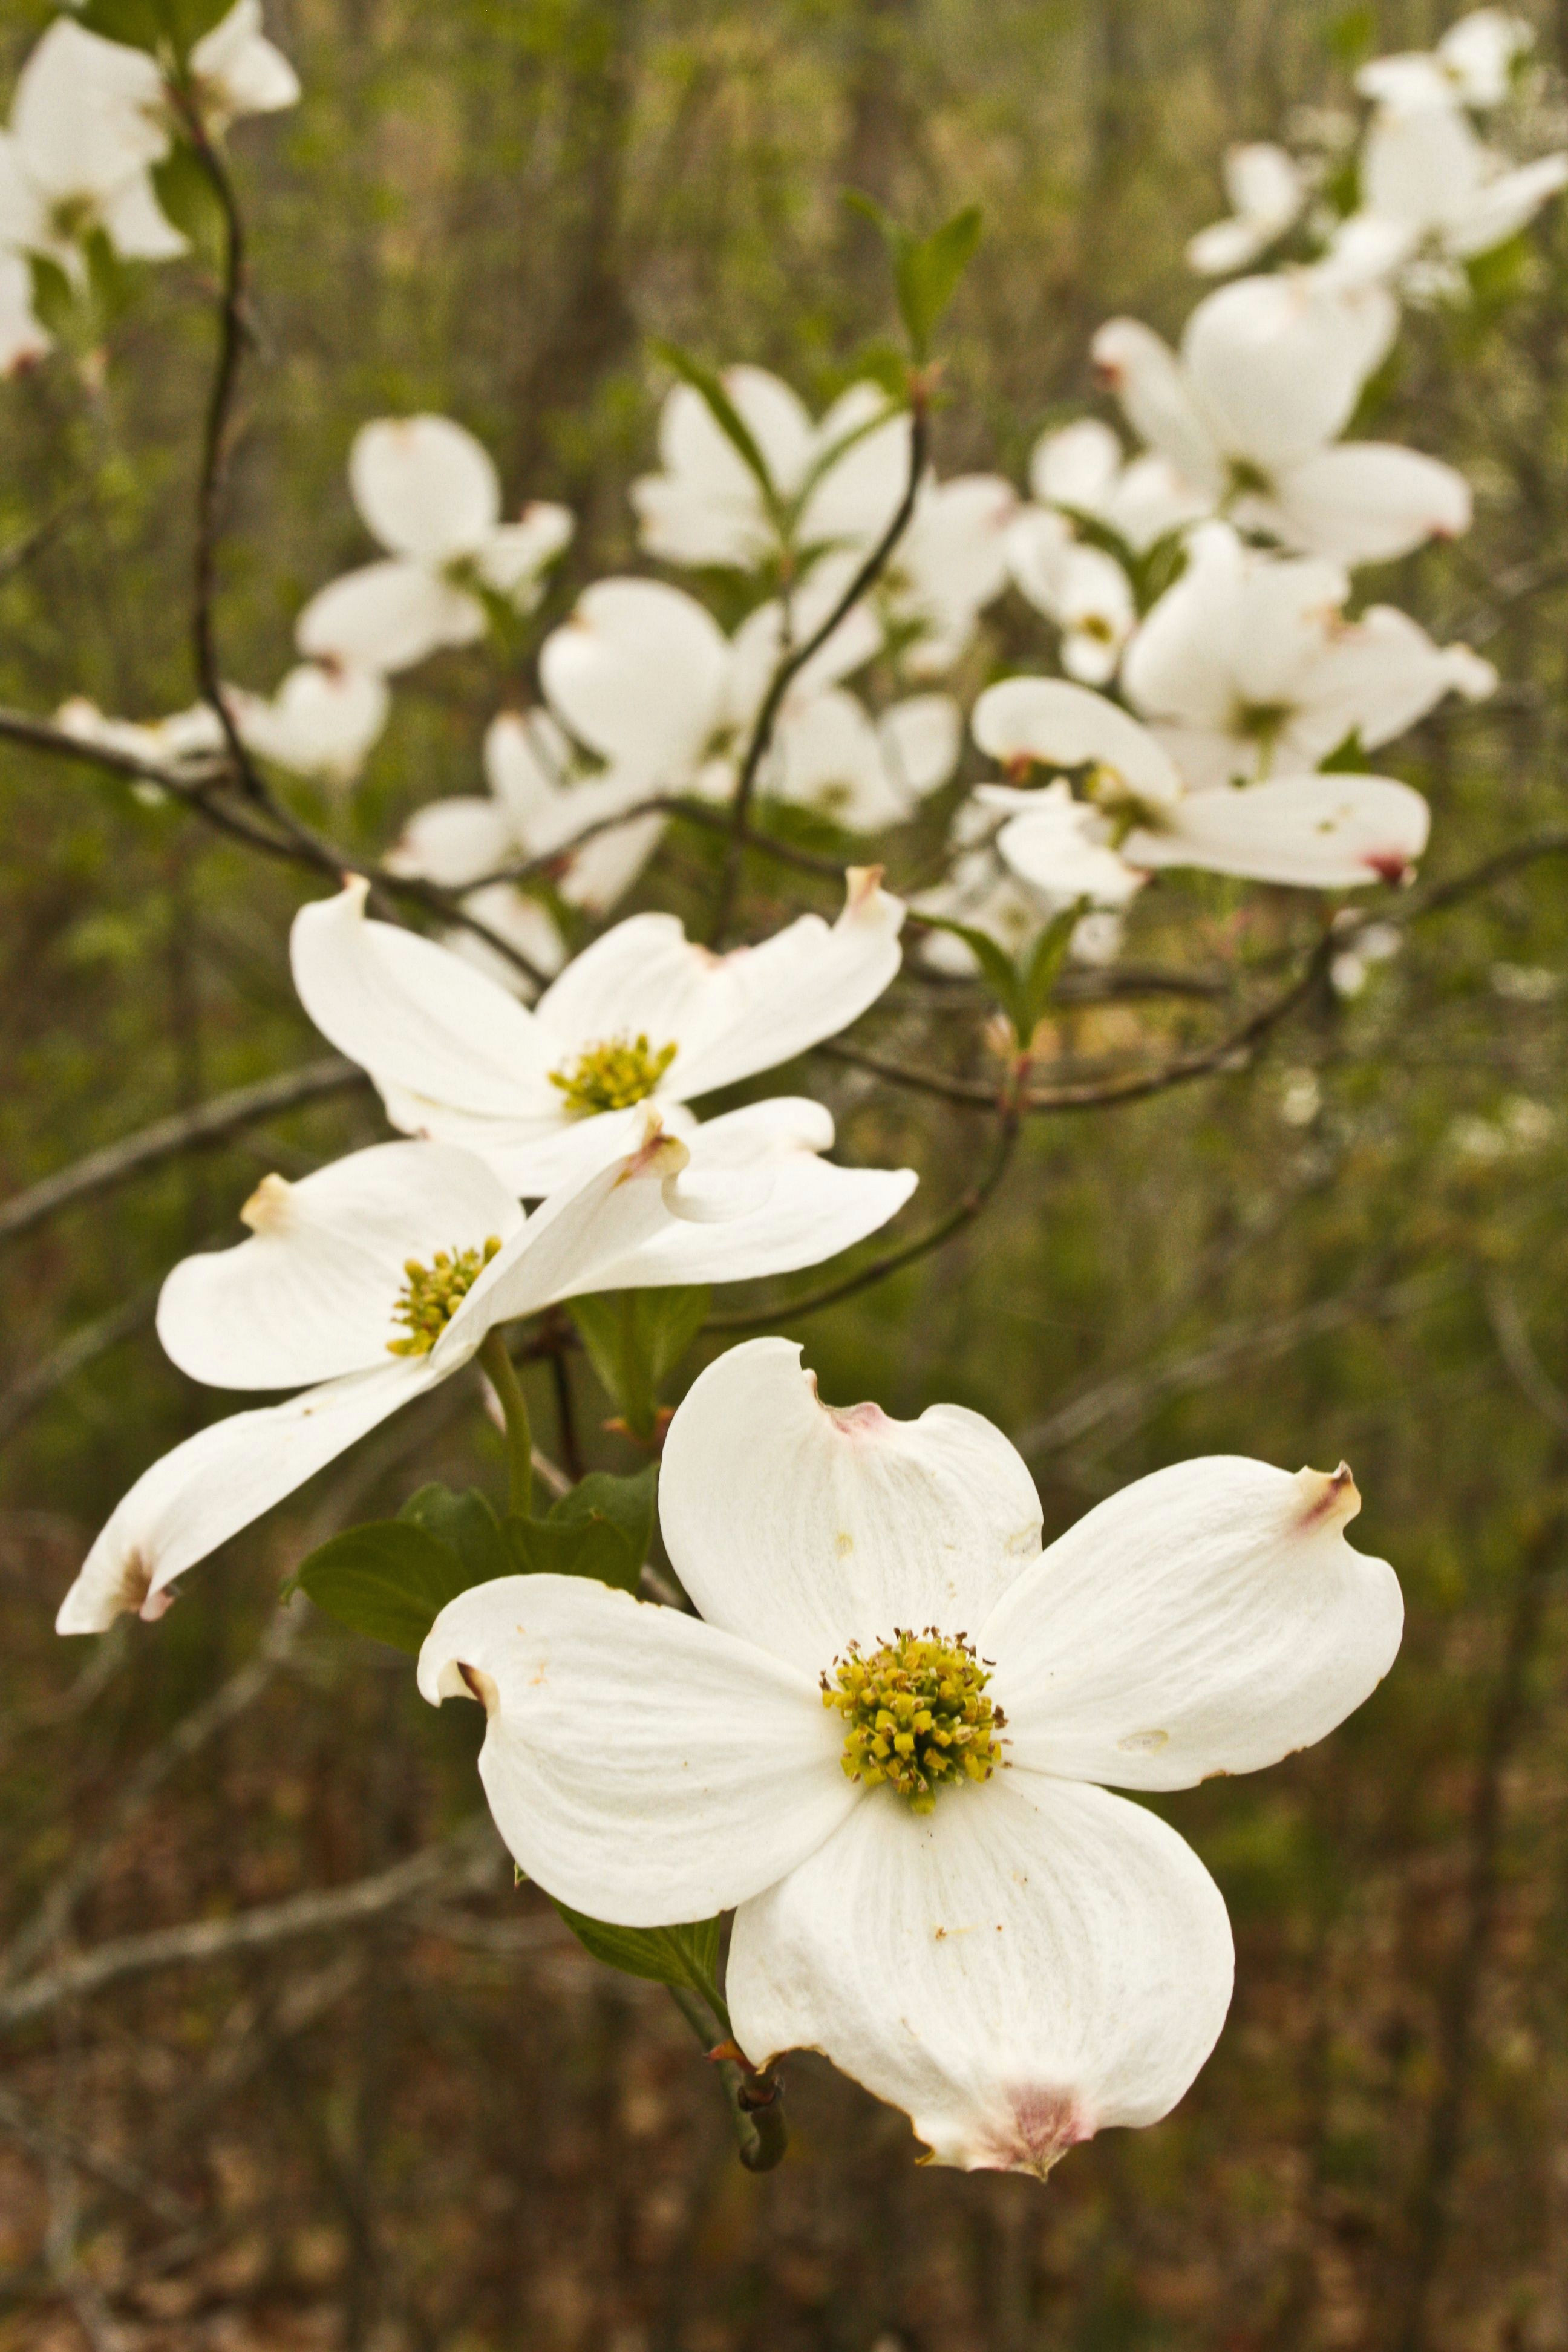 Dogwood Tree Drawing Dogwood Blossoms In Gatlinburg Tennessee Great Smoky Mountains